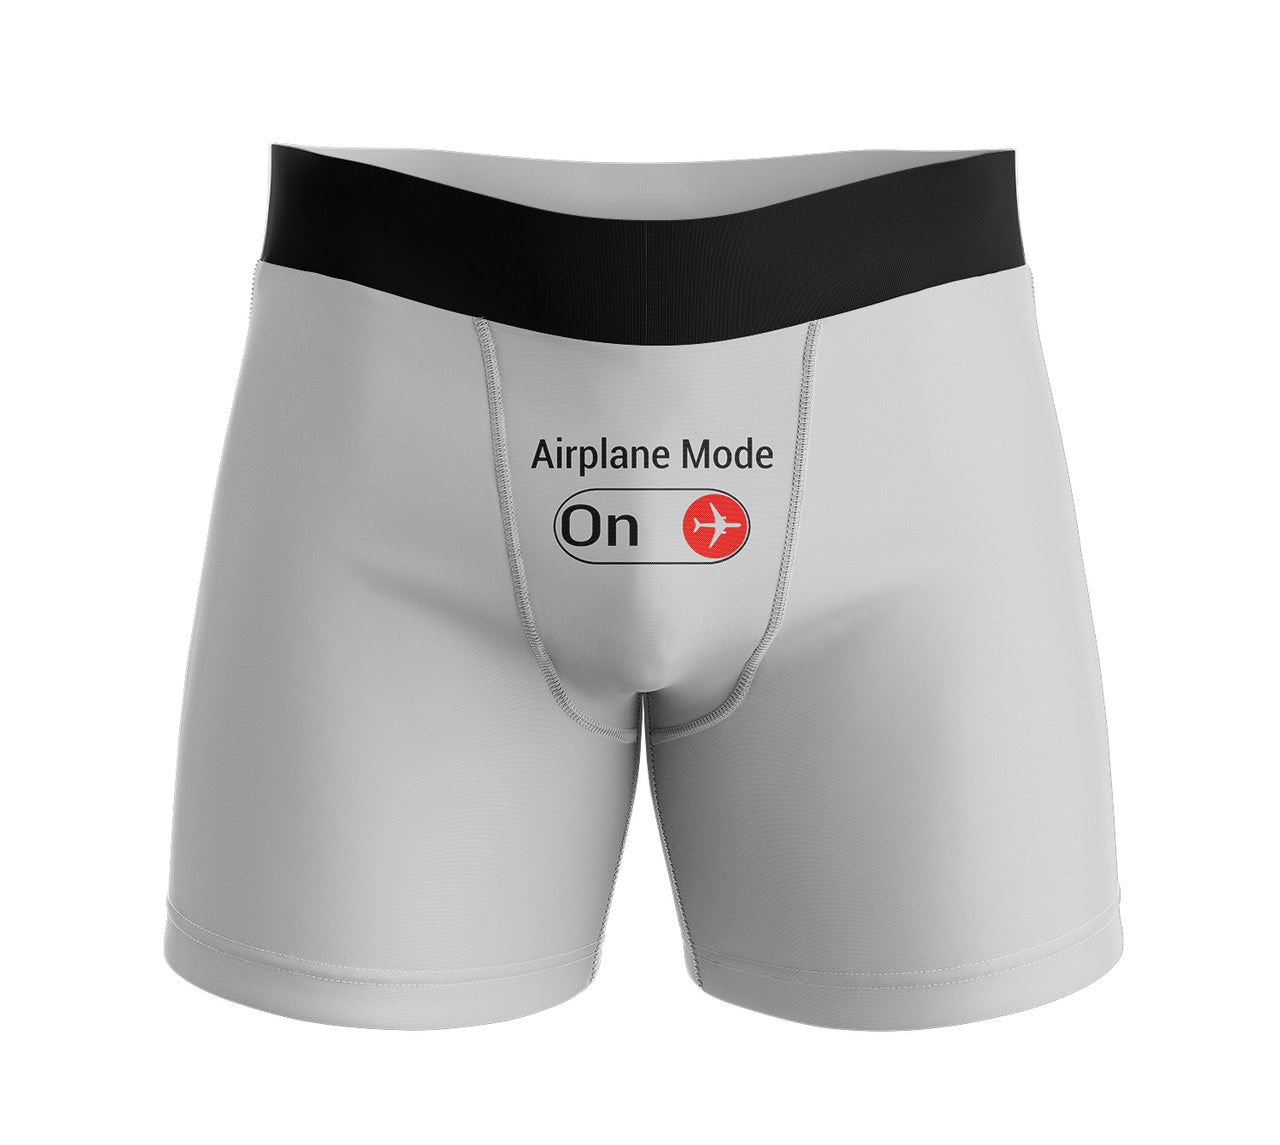 Airplane Mode On Designed Men Boxers